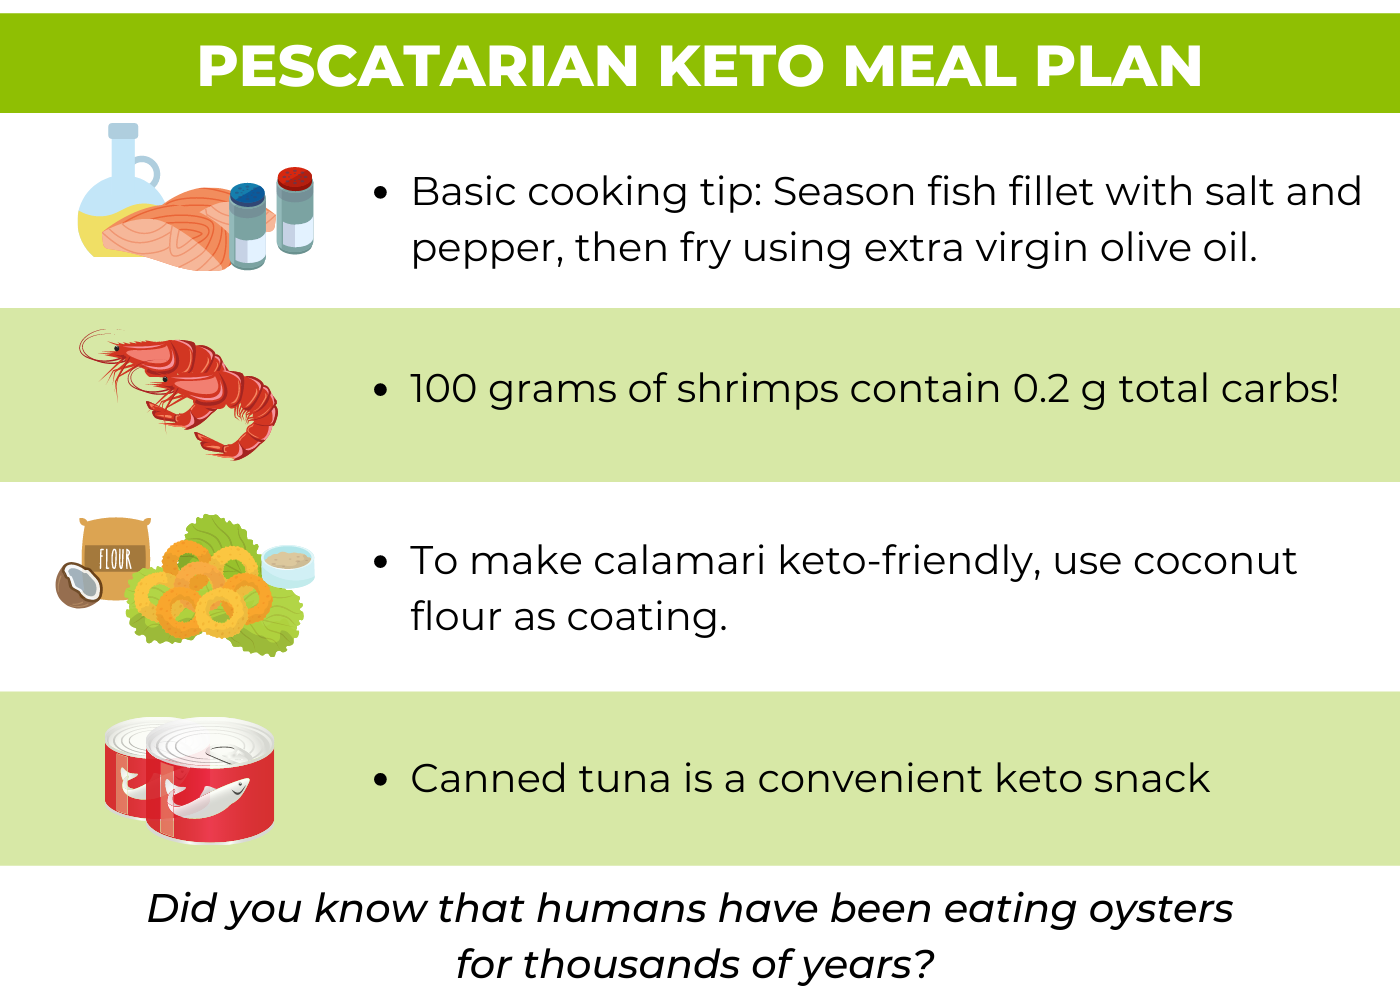 perscatarian keto meal plan infographics